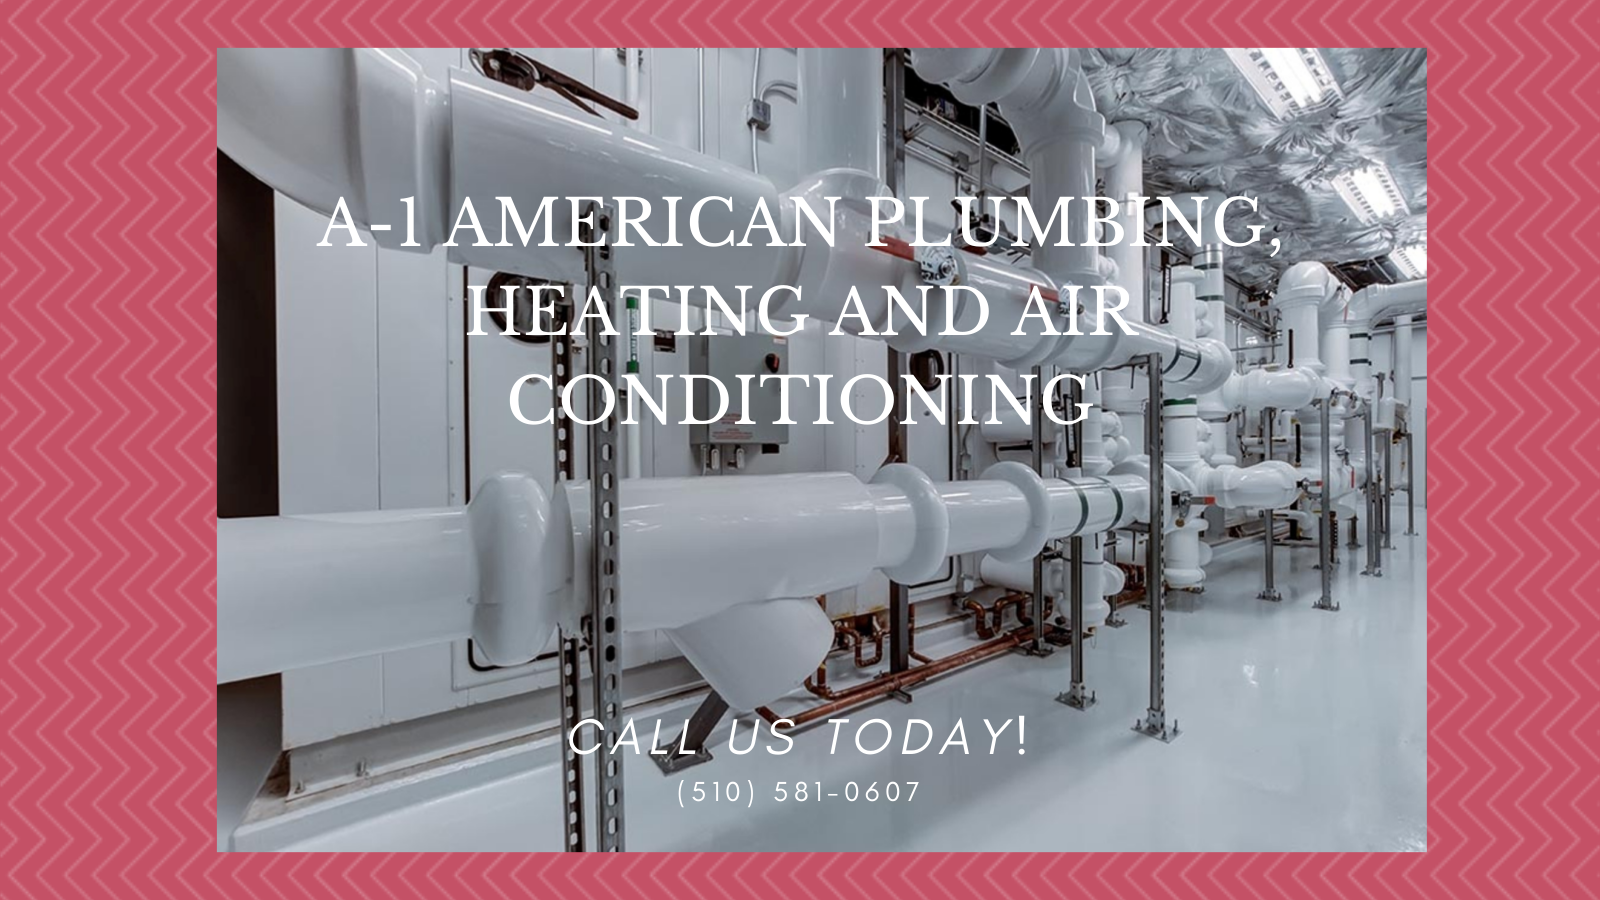  Plumbing, Heating and Air Conditioning